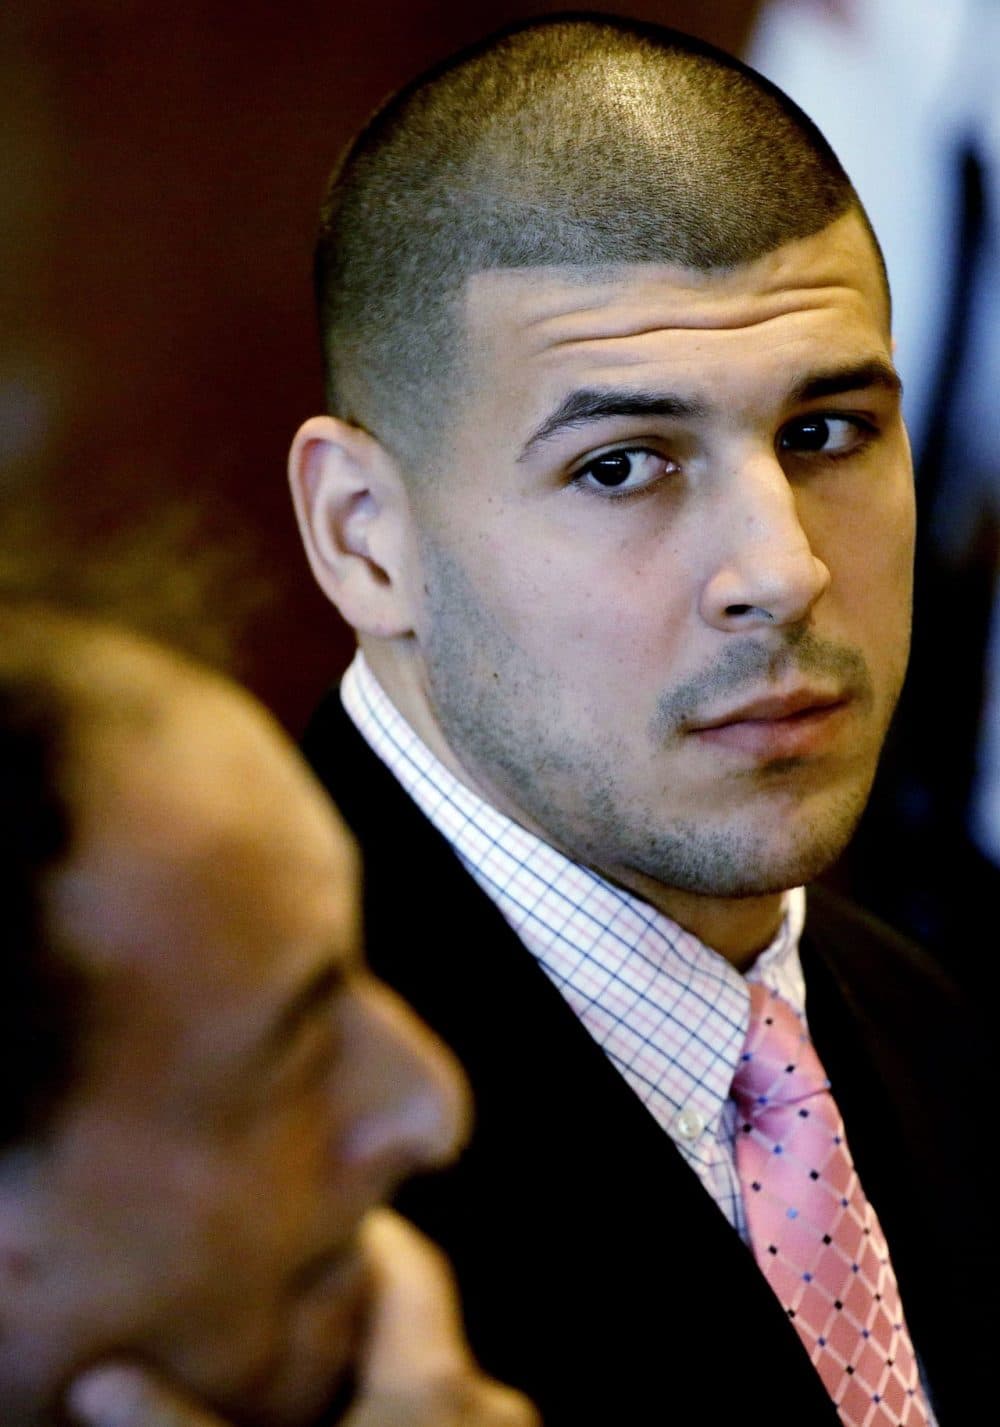 In this Oct. 21, 2013 file photo, former New England Patriot football player Aaron Hernandez looks to one of his attorneys, James Sultan, during a hearing in Bristol Superior Court in Fall River, Mass. Hernandez has pleaded not guilty to the murder of Odin Lloyd, whose body was found June 17 near Hernandez's home in North Attleborough, Mass. A search warrant filed in Connecticut in December 2013 shows police believe Hernandez was in an SUV when someone inside shot two people to death in Boston in 2012. In searching a home of Hernandez's uncle in Bristol, Conn., in June, police found the SUV wanted in the 2012 shooting in Boston. (Stephan Savoia/AP)